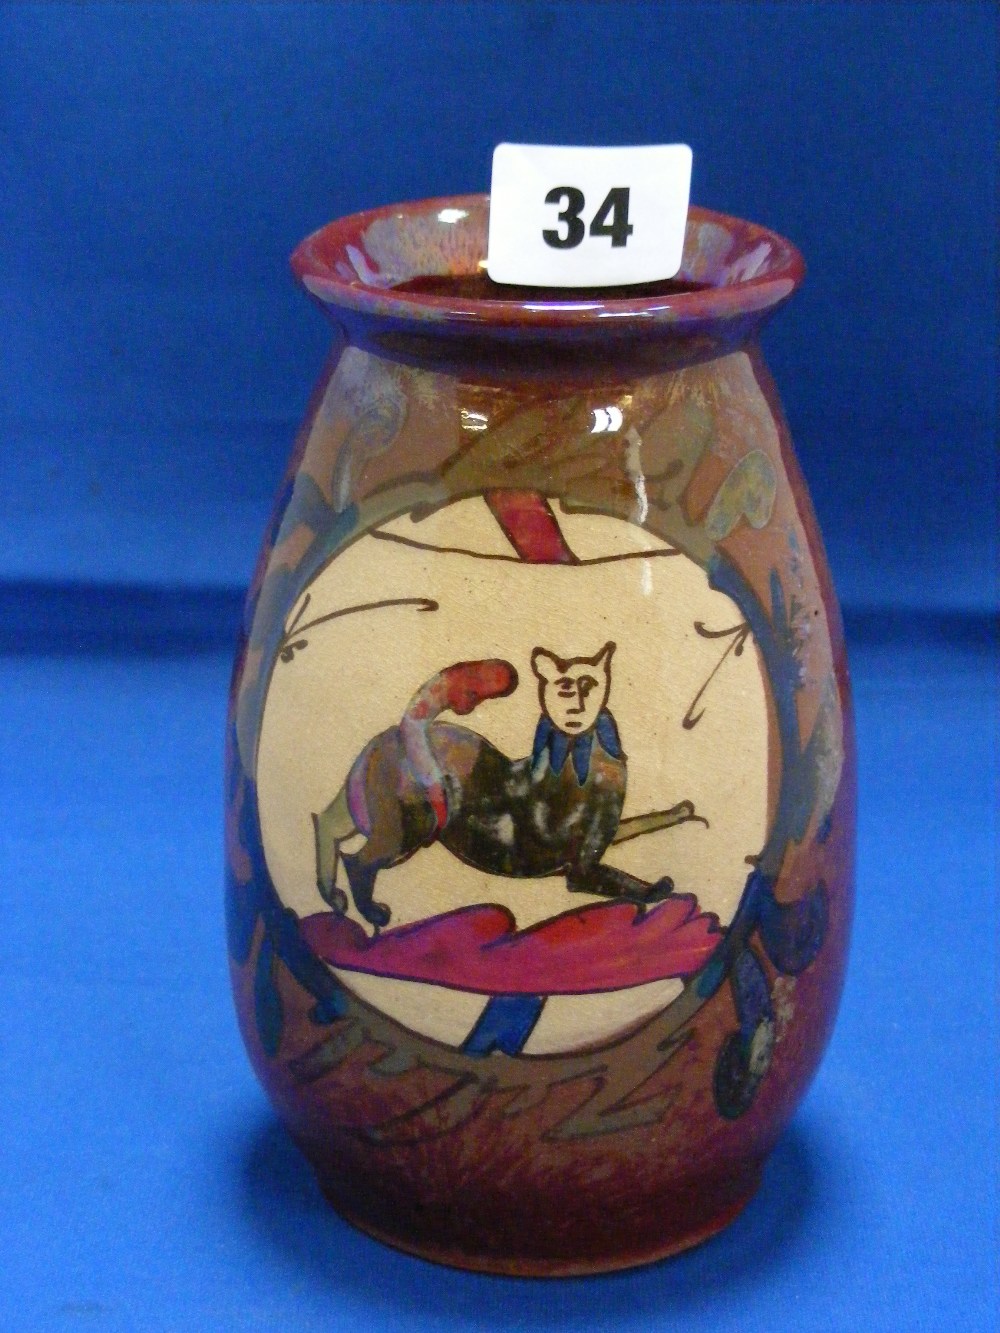 An unusual Denby Art vase with two panels depicting Bayeux Tapestry style scenes and finished with